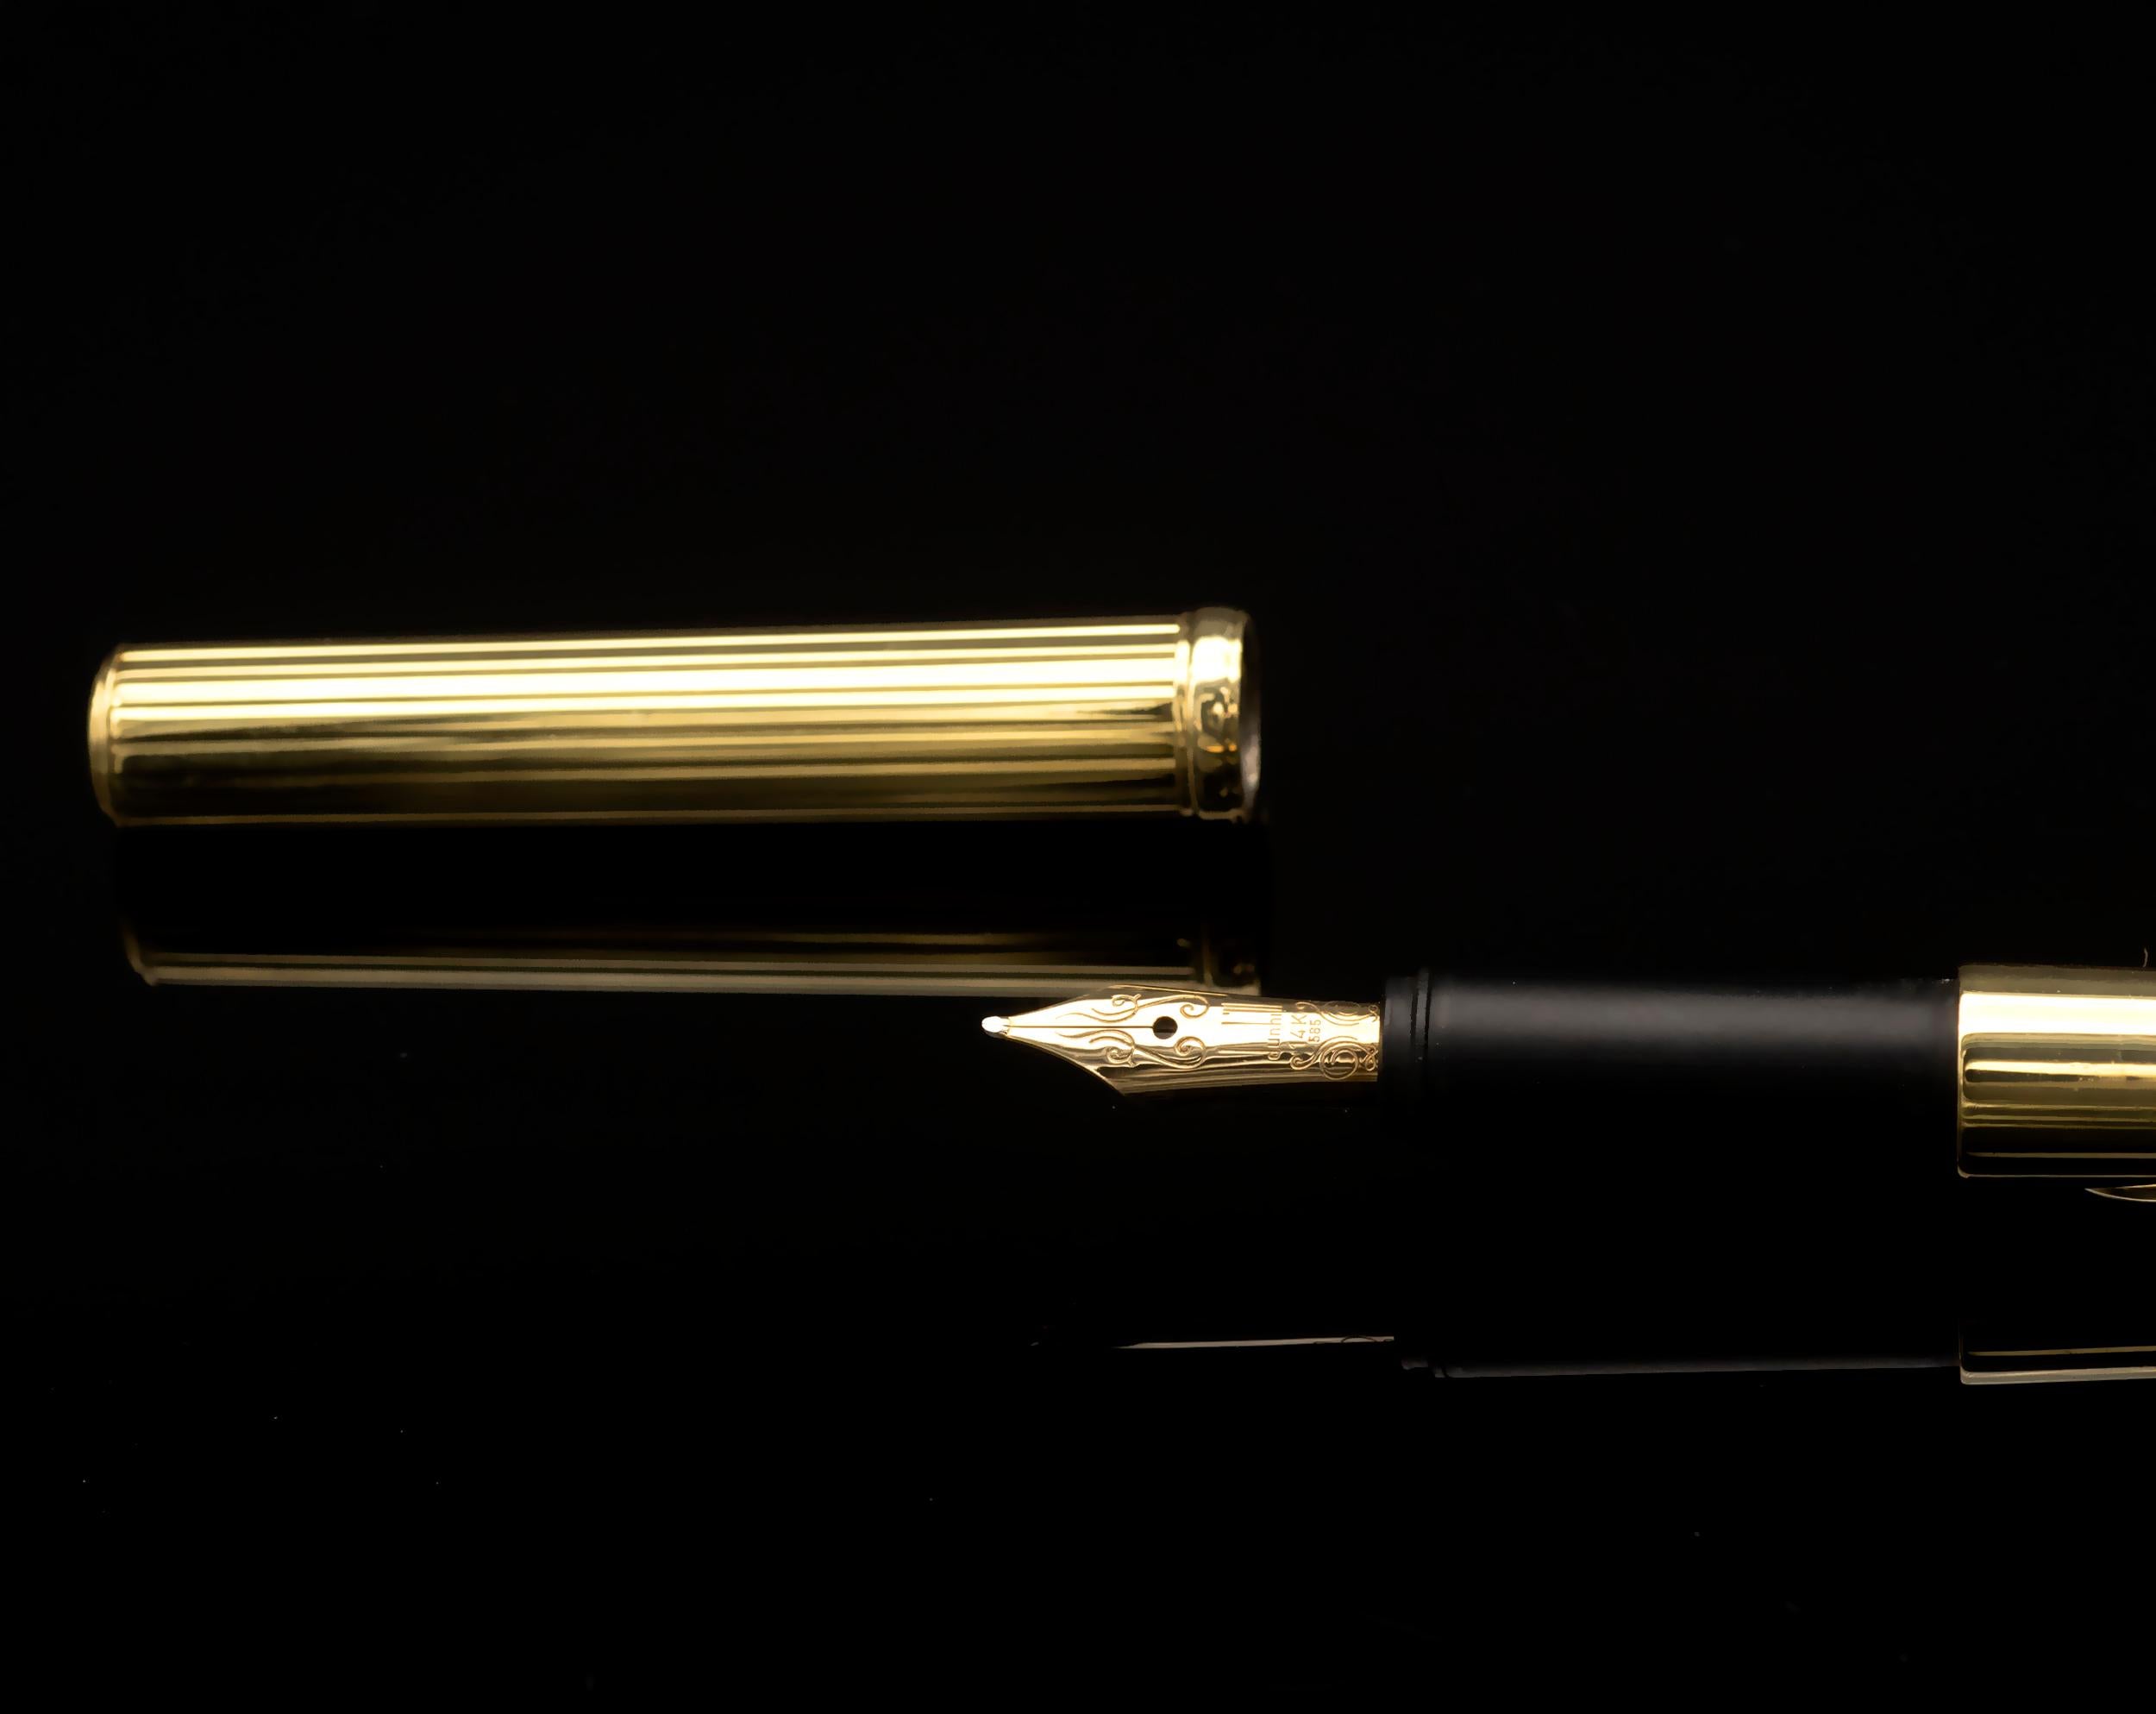 Extraordinary Dunhill pen in solid 18 karat yellow Gold with in its midst a line of diamonds set on White gold. The Dunhill Nib is 14 kt gold. 
Incredibly refined design and superb craftsmanship quality for a rare item. mint condition, original